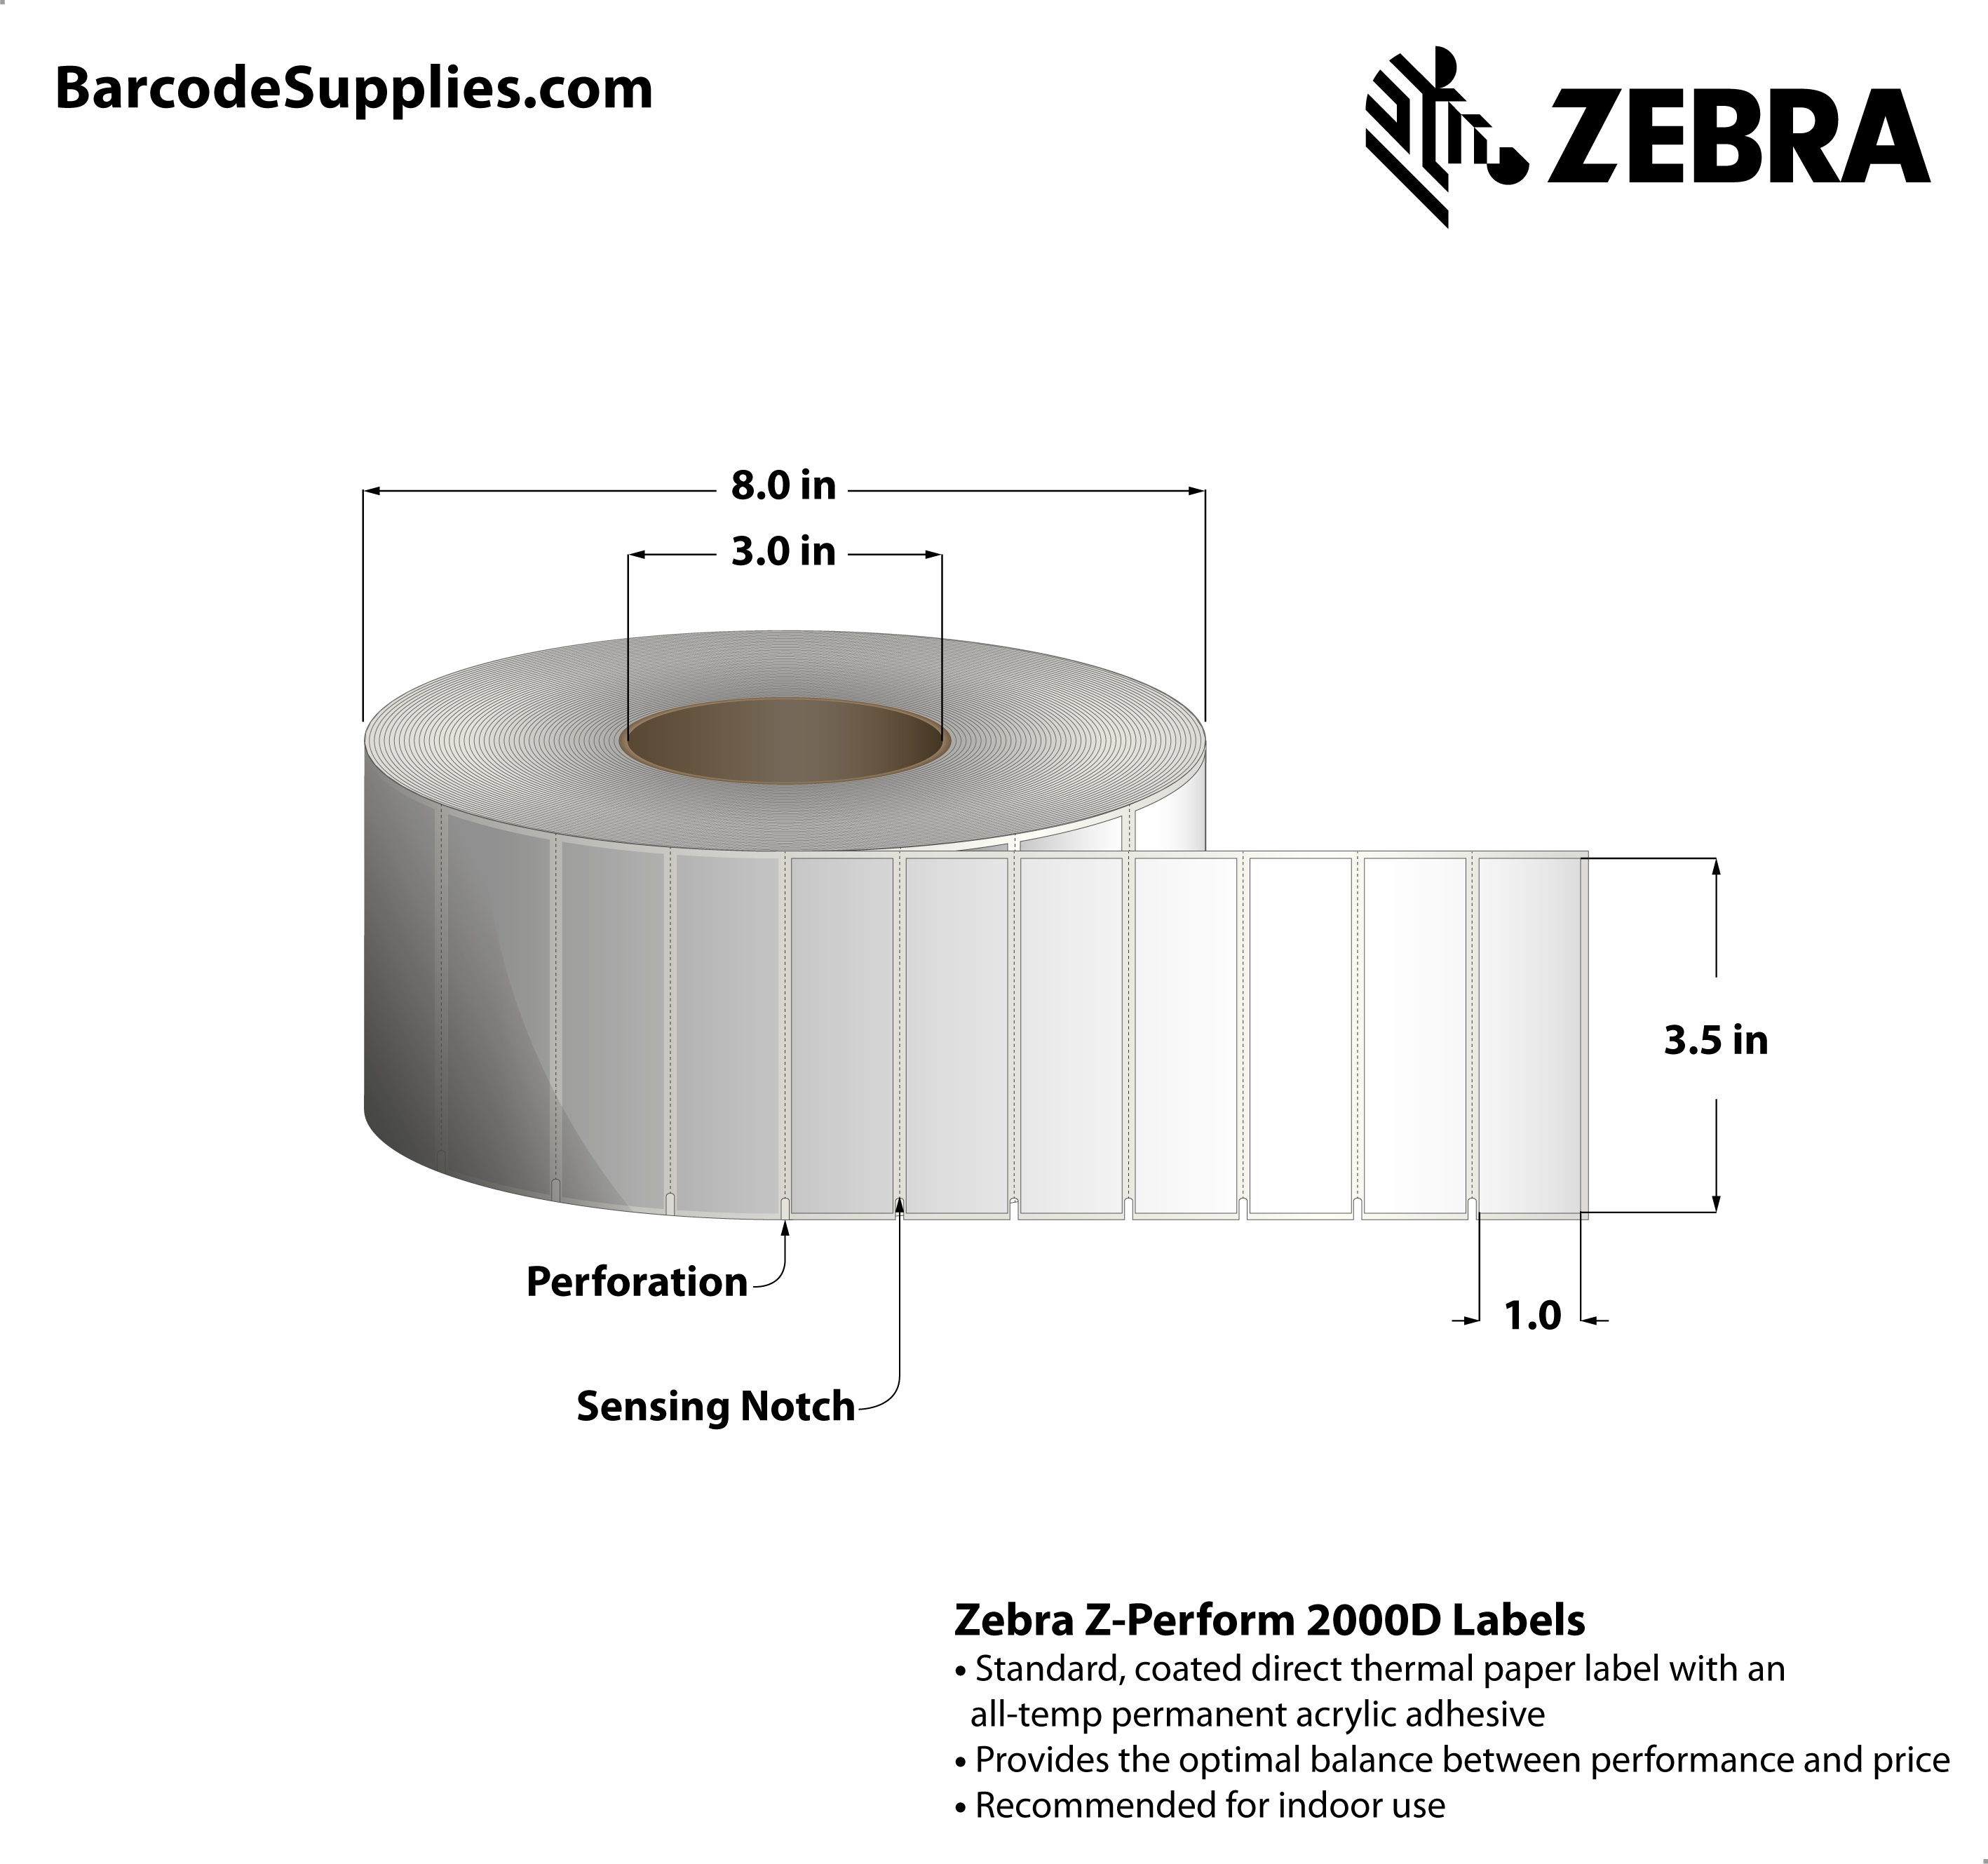 3.5 x 1 Direct Thermal White Z-Perform 2000D Labels With Permanent Adhesive - Label has square edges and side sensing notches on left side. - Perforated - 5800 Labels Per Roll - Carton Of 2 Rolls - 11600 Labels Total - MPN: 10025346